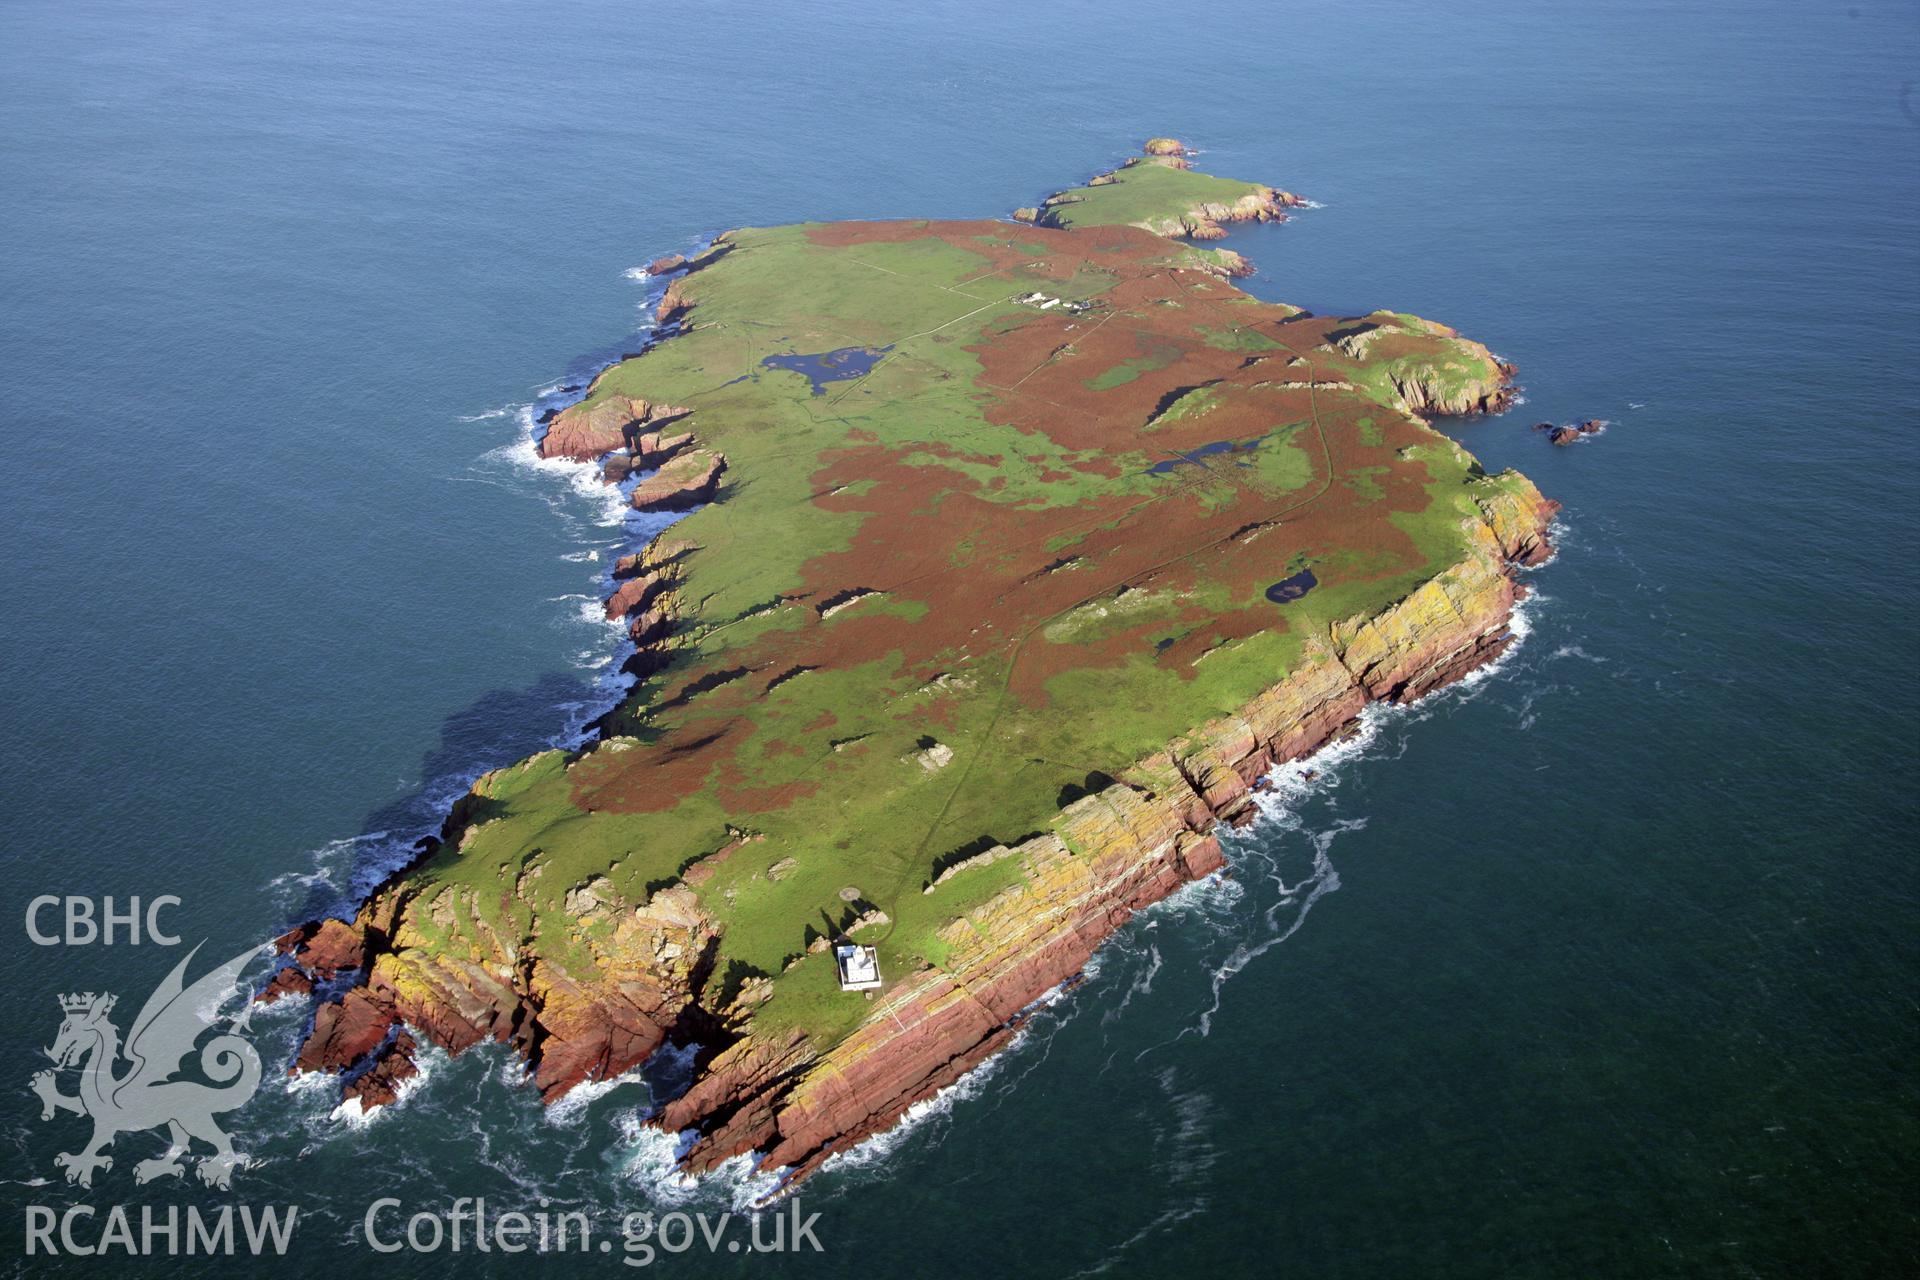 RCAHMW colour oblique photograph of Skokholm Island, viewed from the south-west. Taken by O. Davies & T. Driver on 22/11/2013.